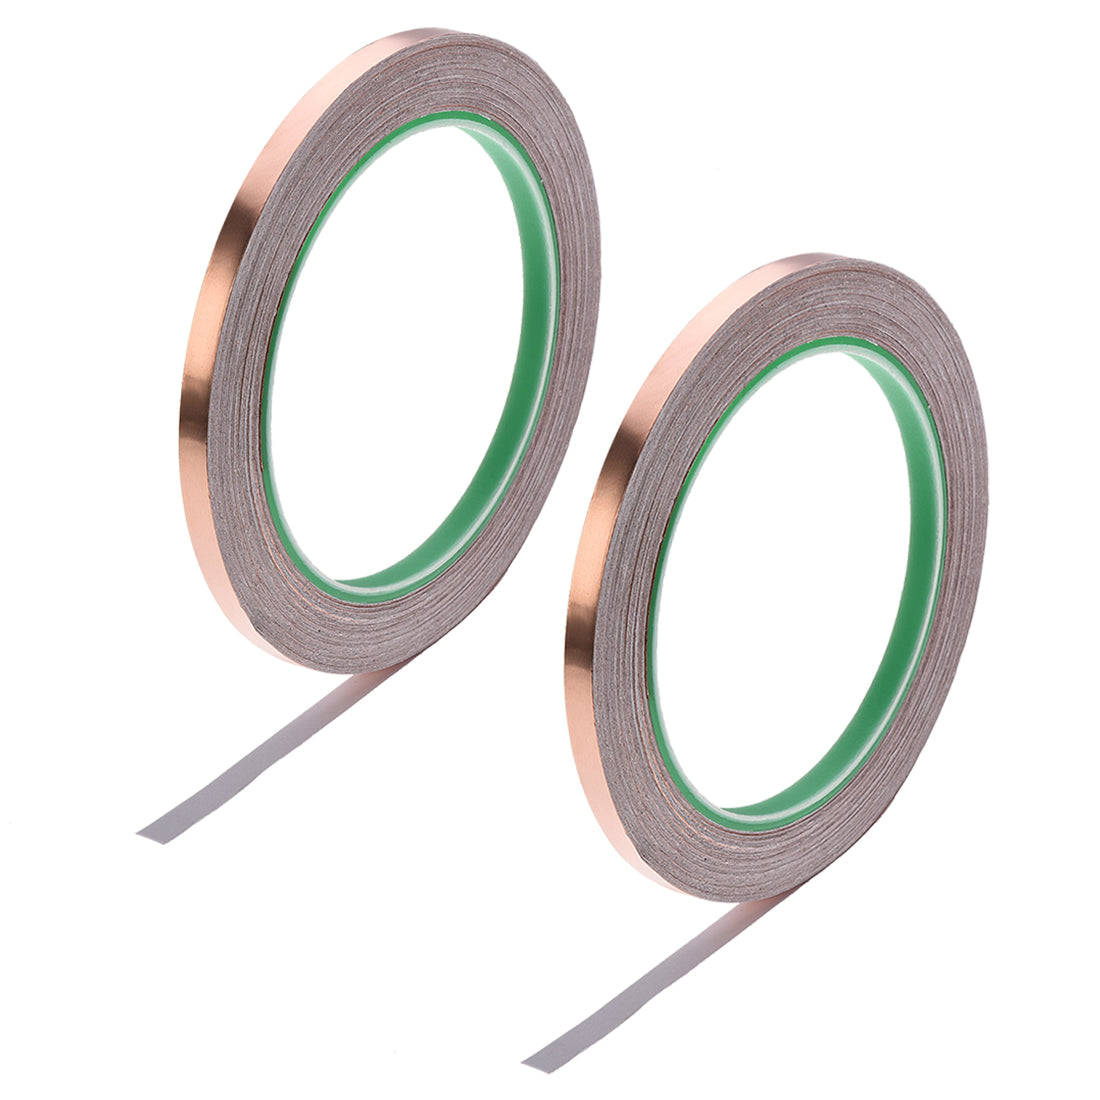 uxcell Uxcell Double Sided Conductive Tape Copper Foil Tape 6mm x 20m for EMI Shielding 2 Roll